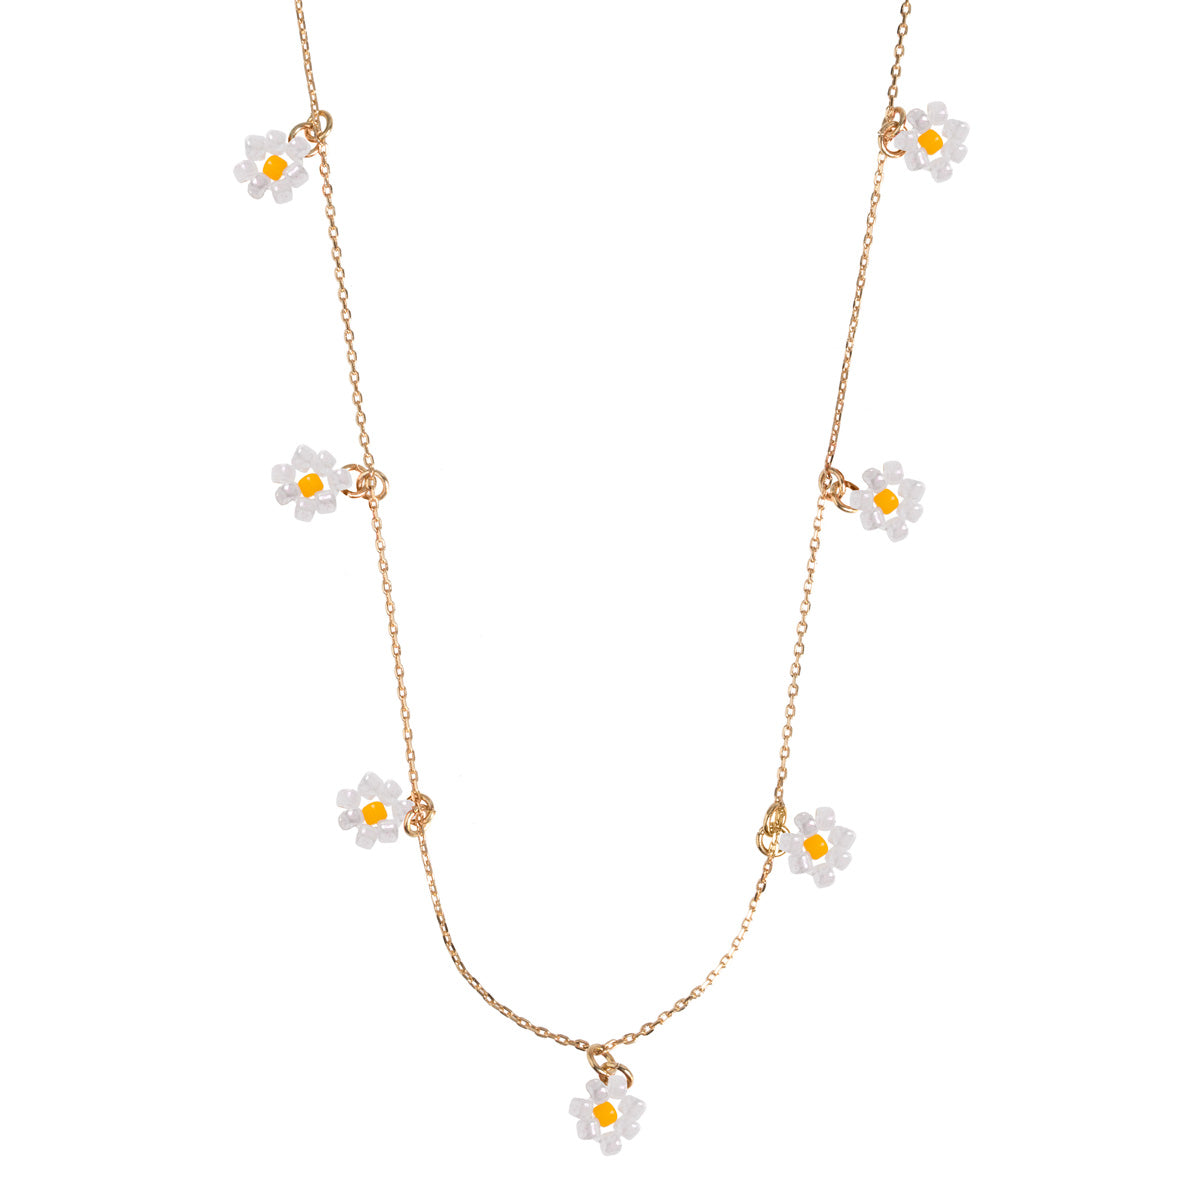 Kette Small Flower Bead Necklace - White